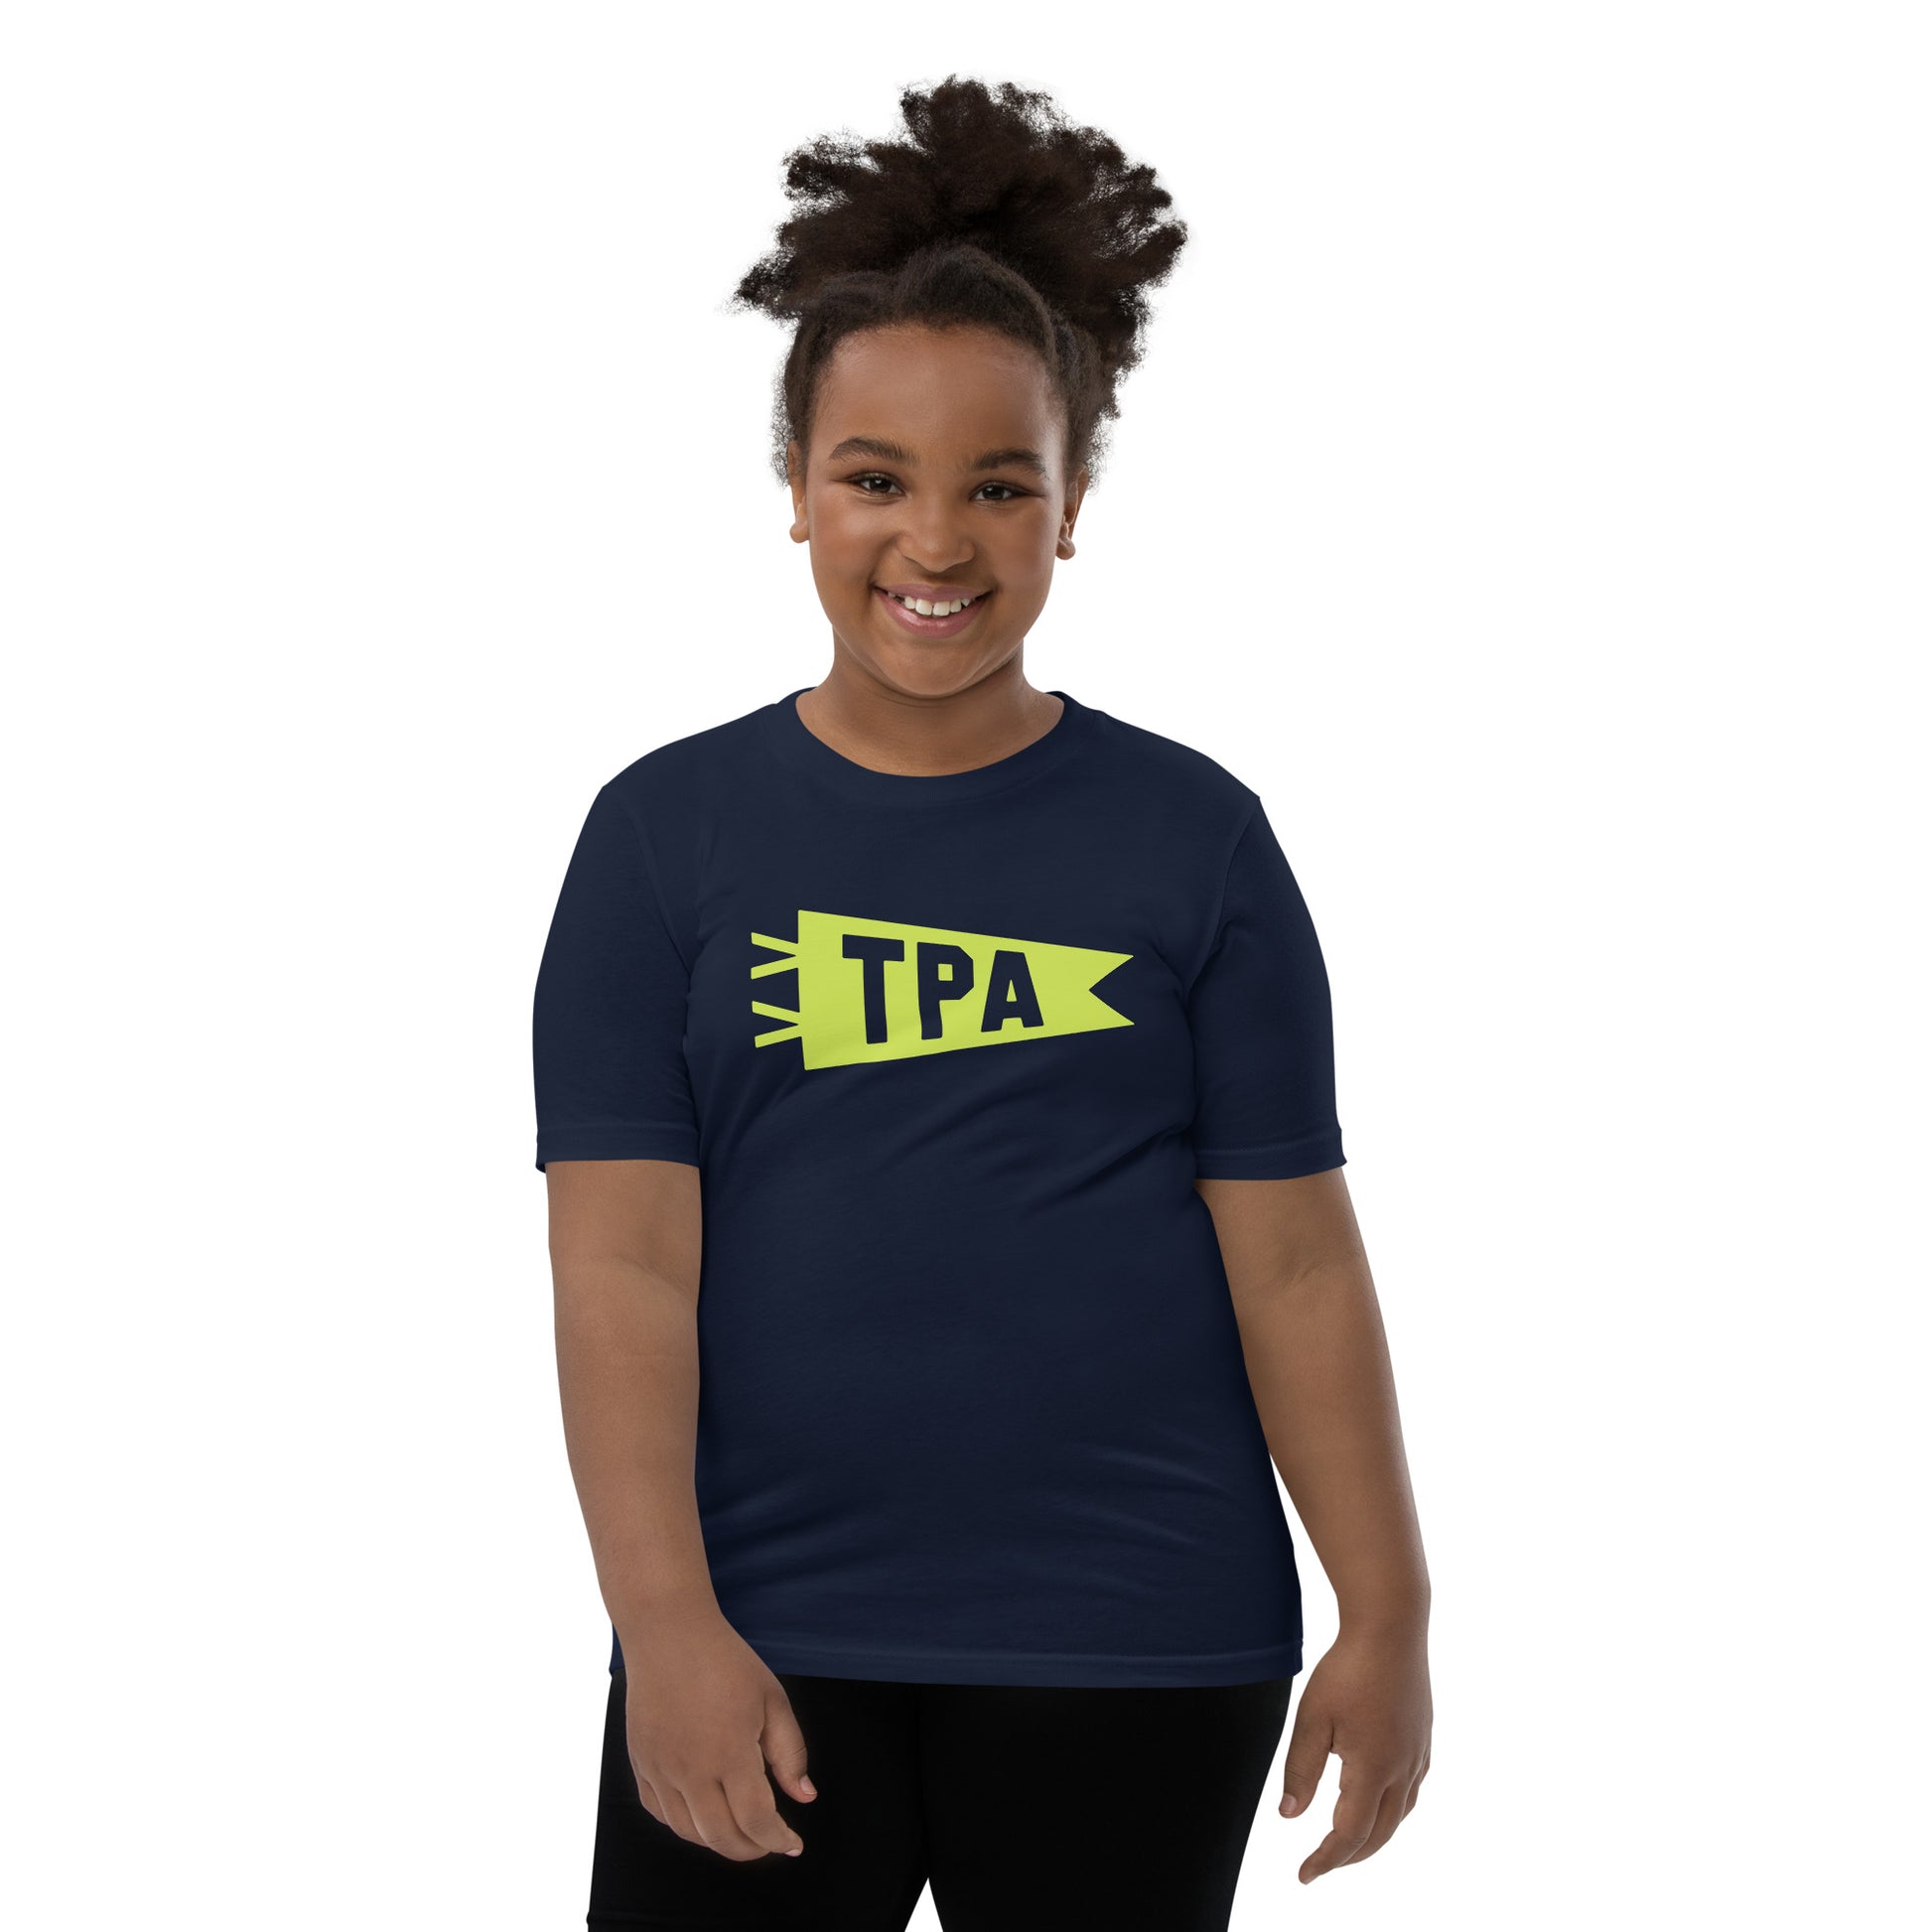 Kid's Airport Code Tee - Green Graphic • TPA Tampa • YHM Designs - Image 05